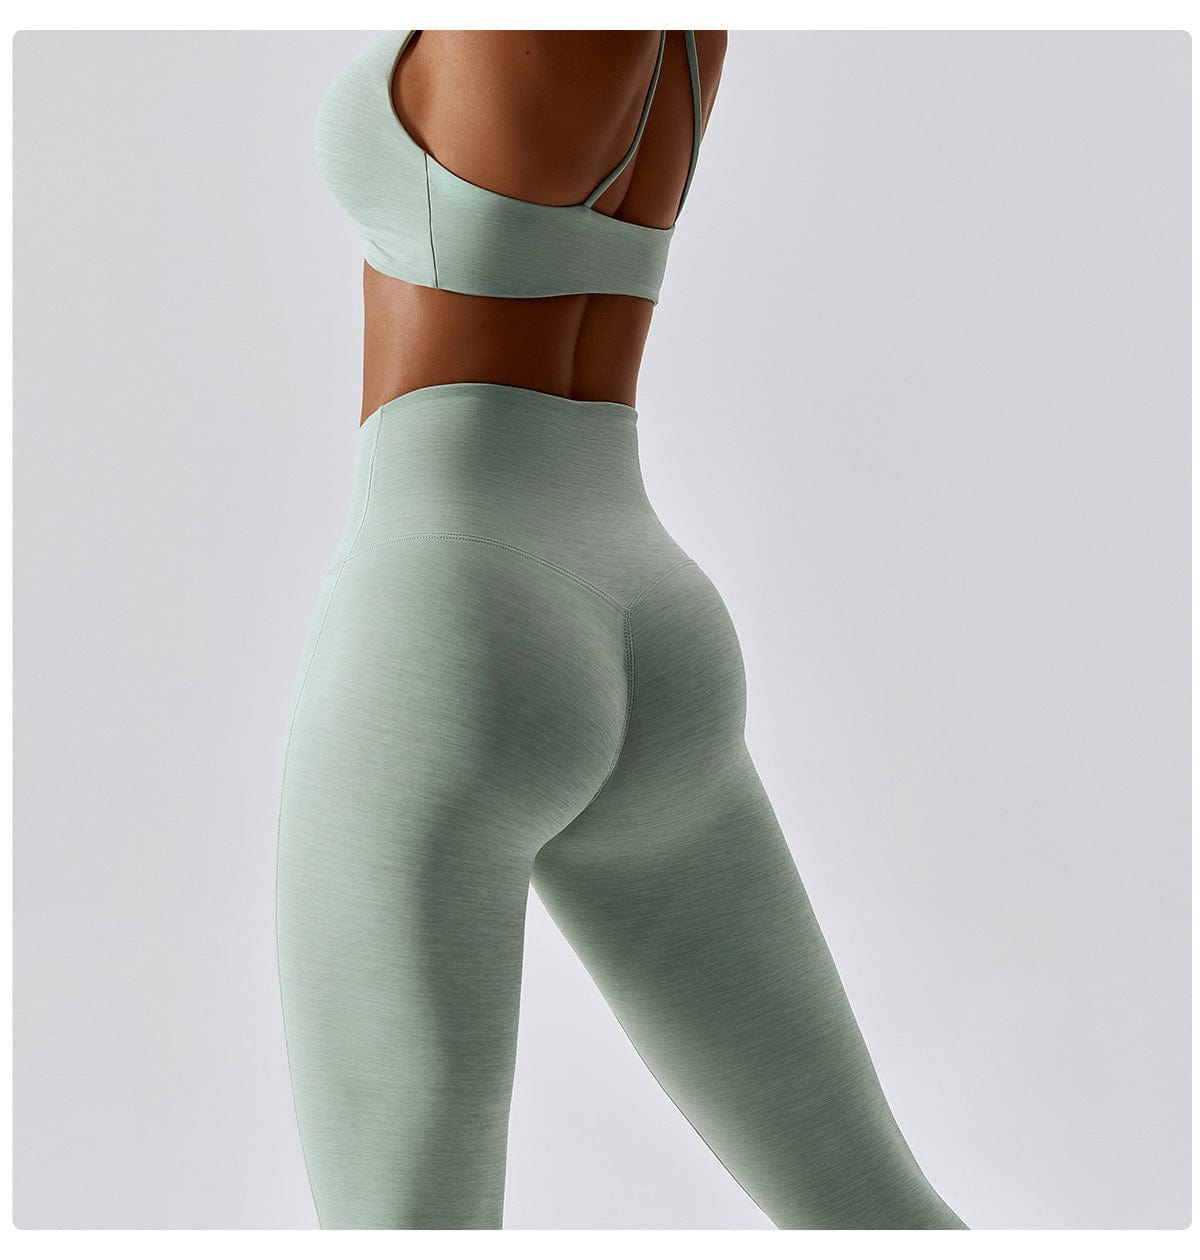 SqueezMeSkinny Quick Drying Fitness Activewear with Scrunch Hip Up Leggings